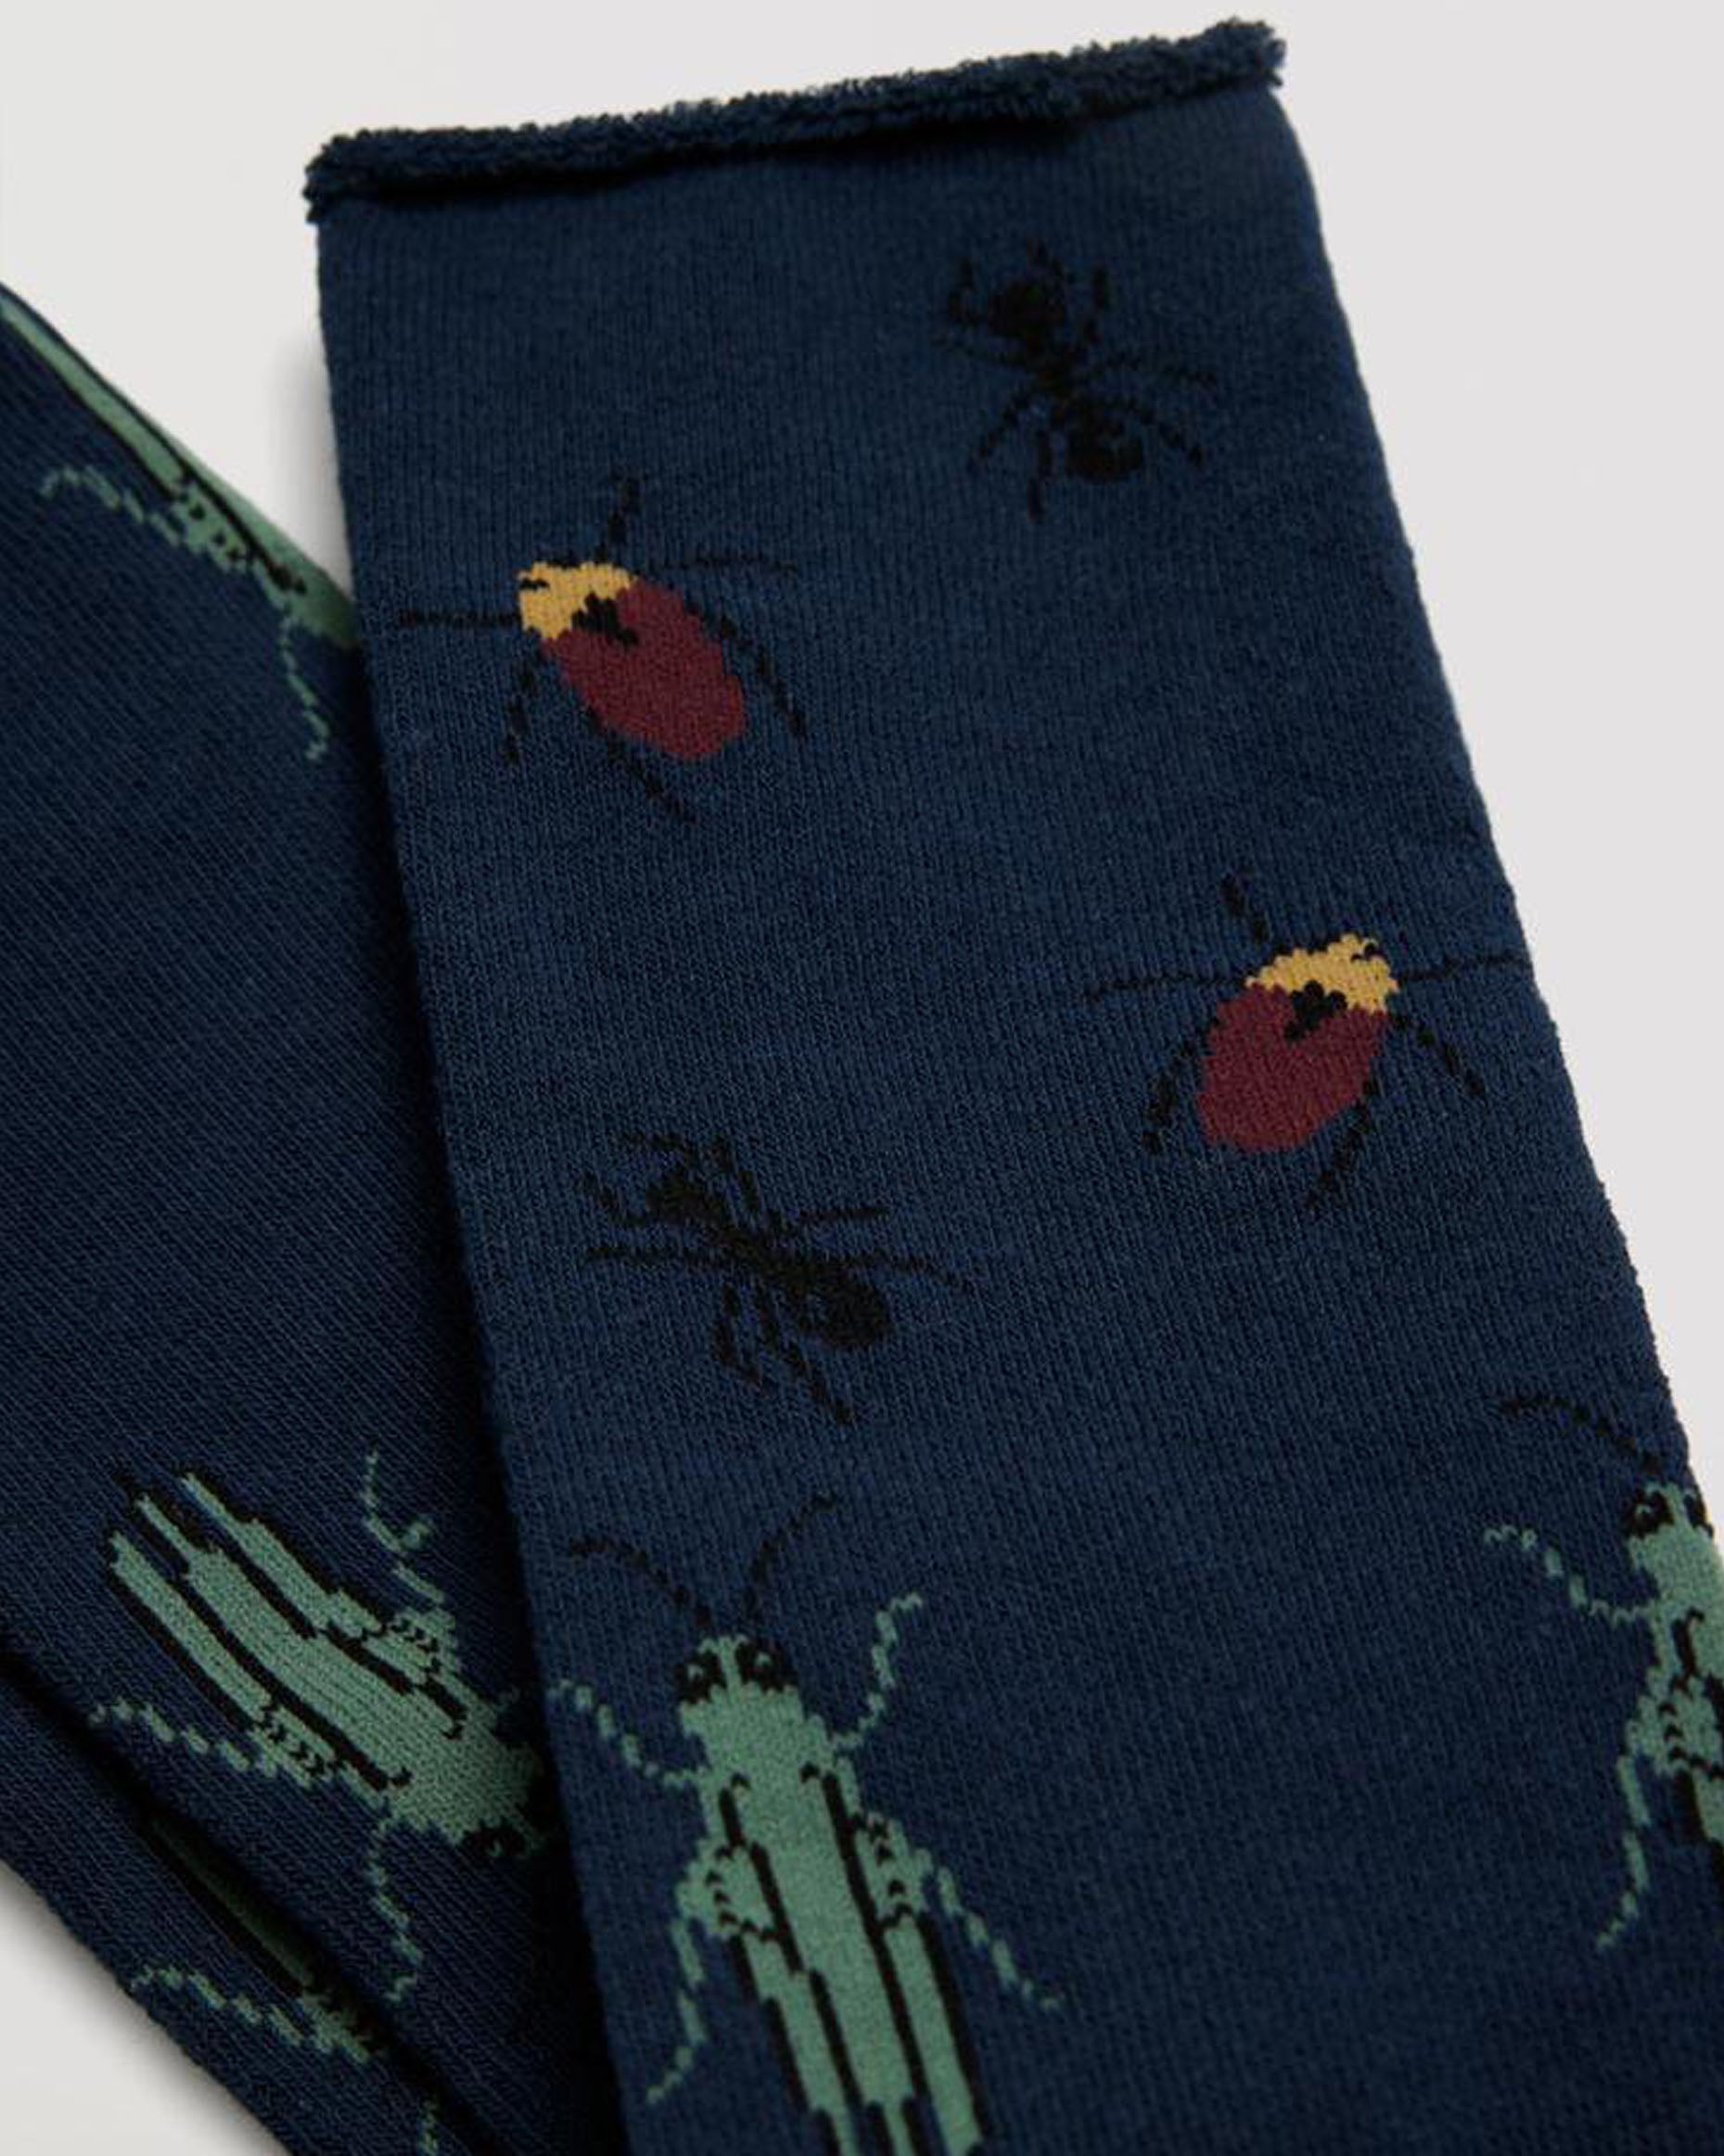 Ysabel Mora 22885 Insect Sock - Thick and warm navy terry lined thermal cotton no cuff ankle socks with an all over insect pattern in wine, sage green, mustard and black.